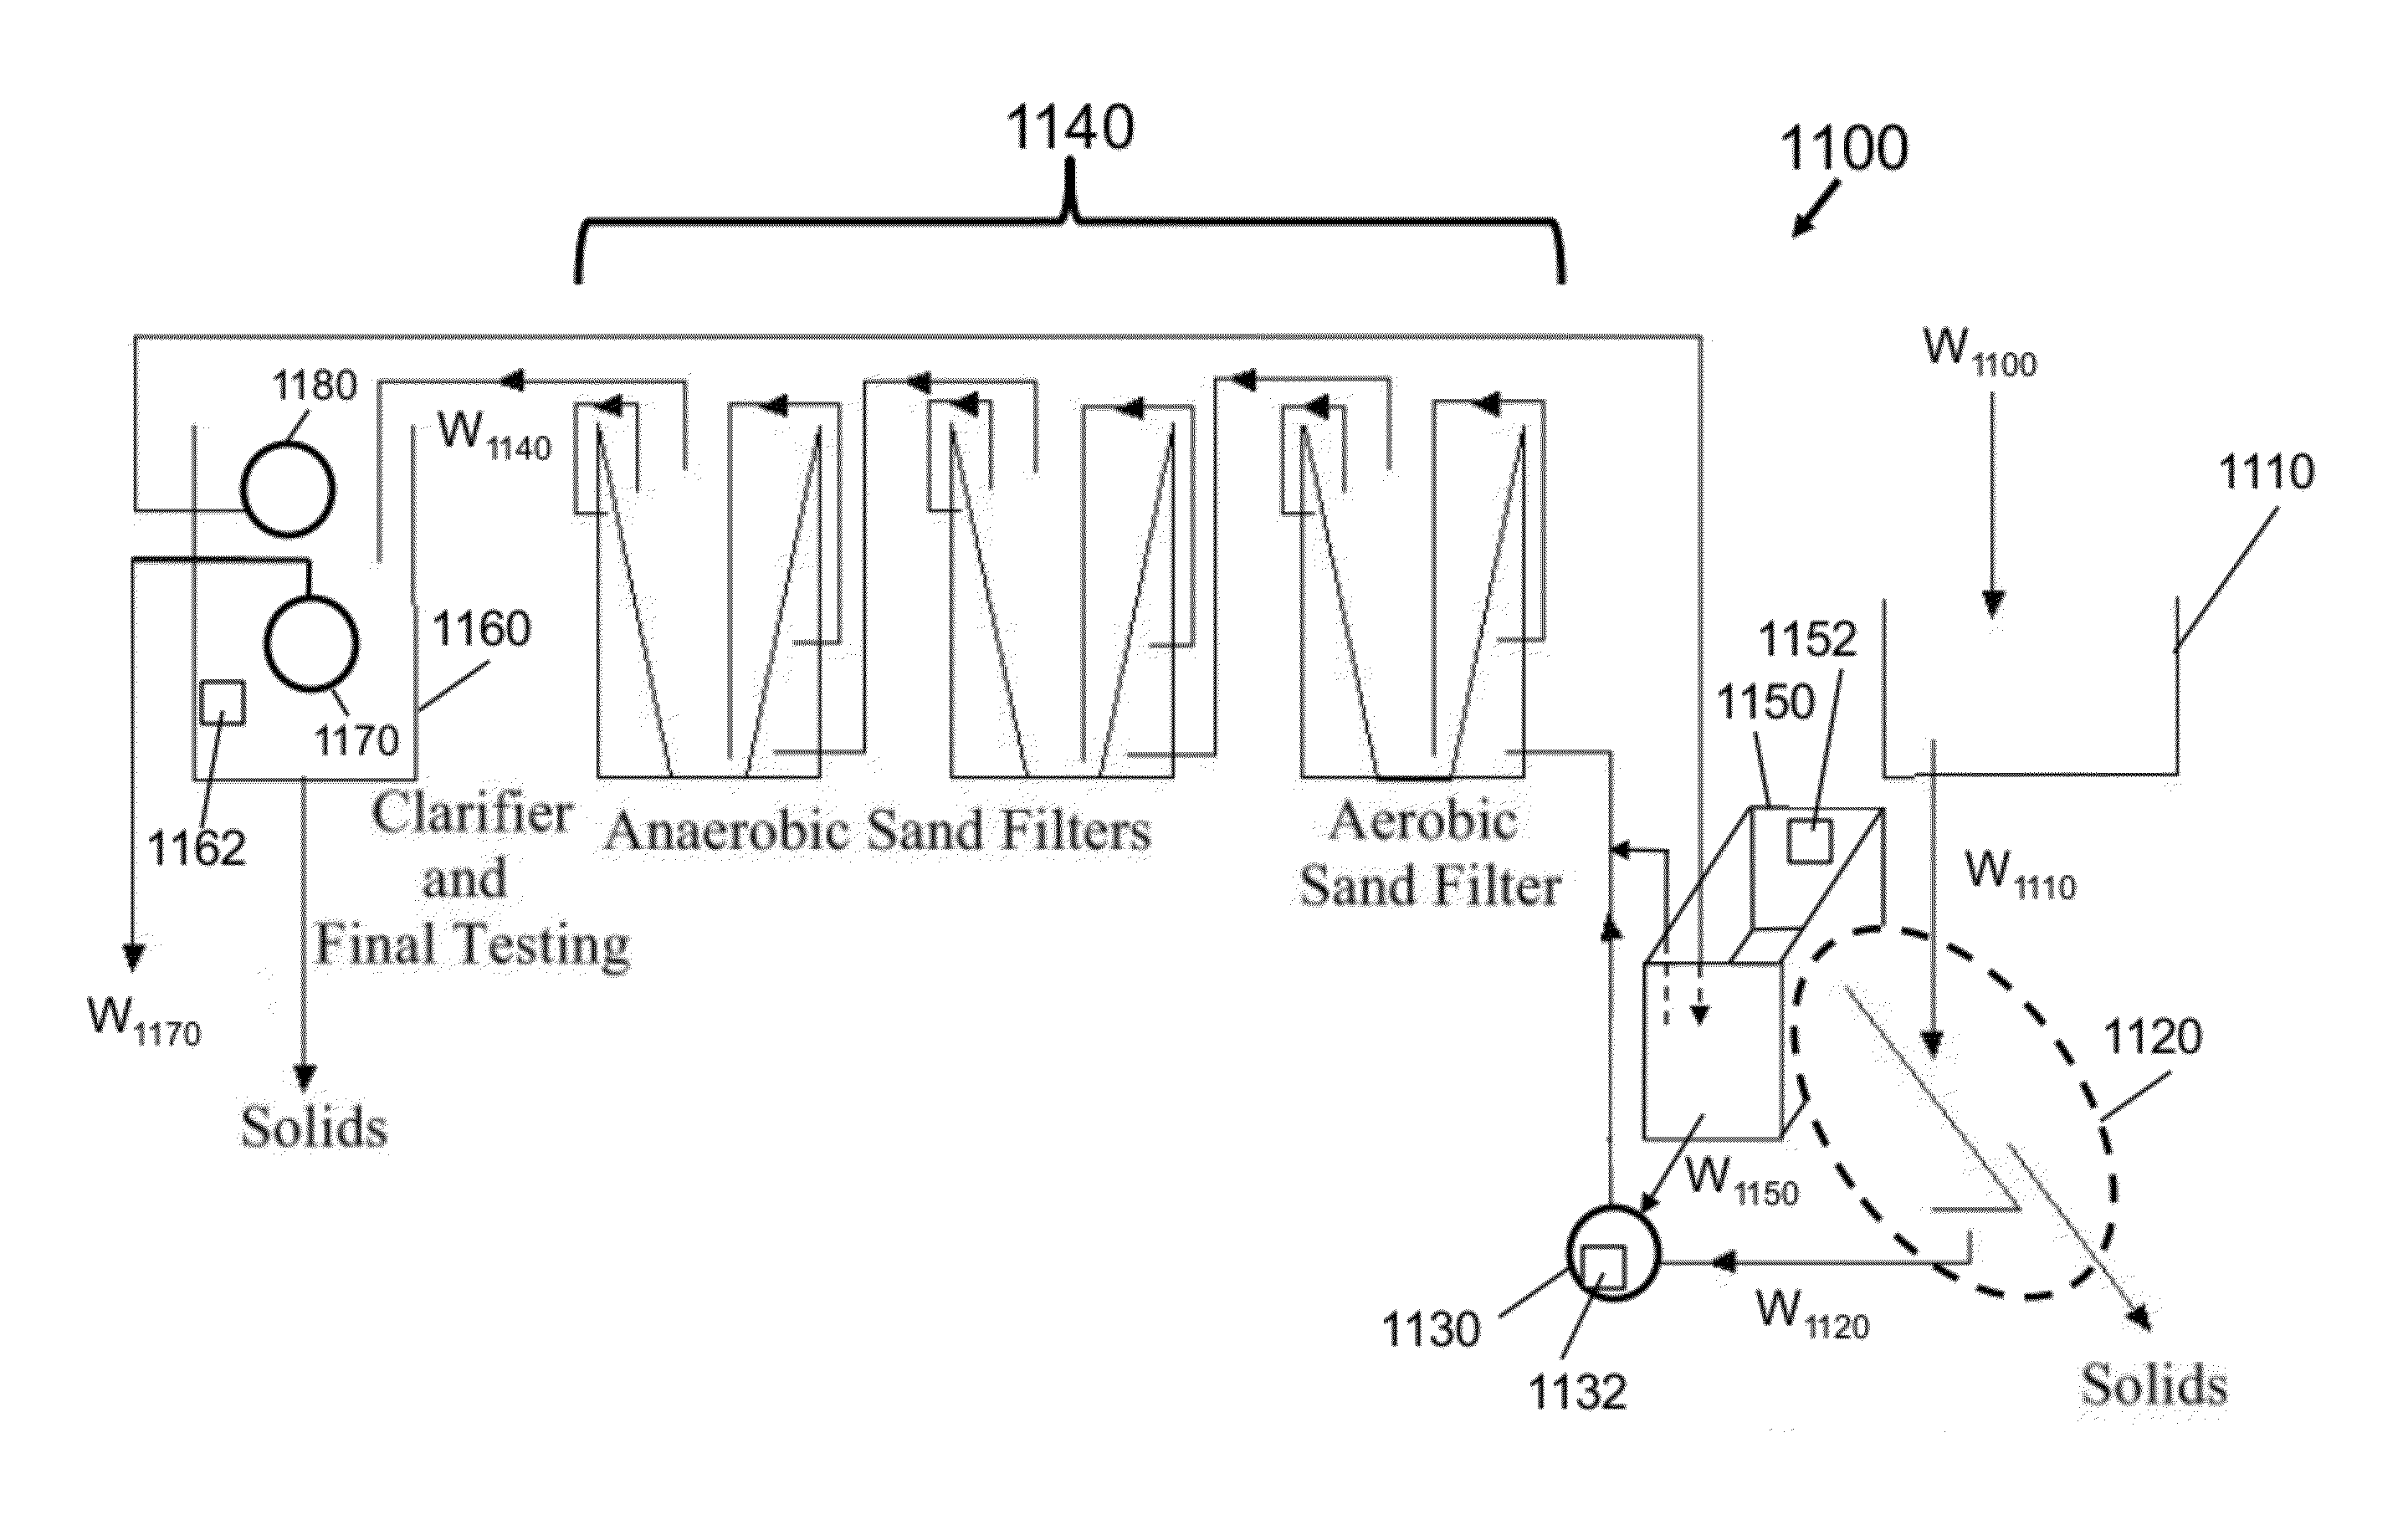 System and Process for Removing Nitrogen Compounds and Odors from Wastewater and Wastewater Treatment System